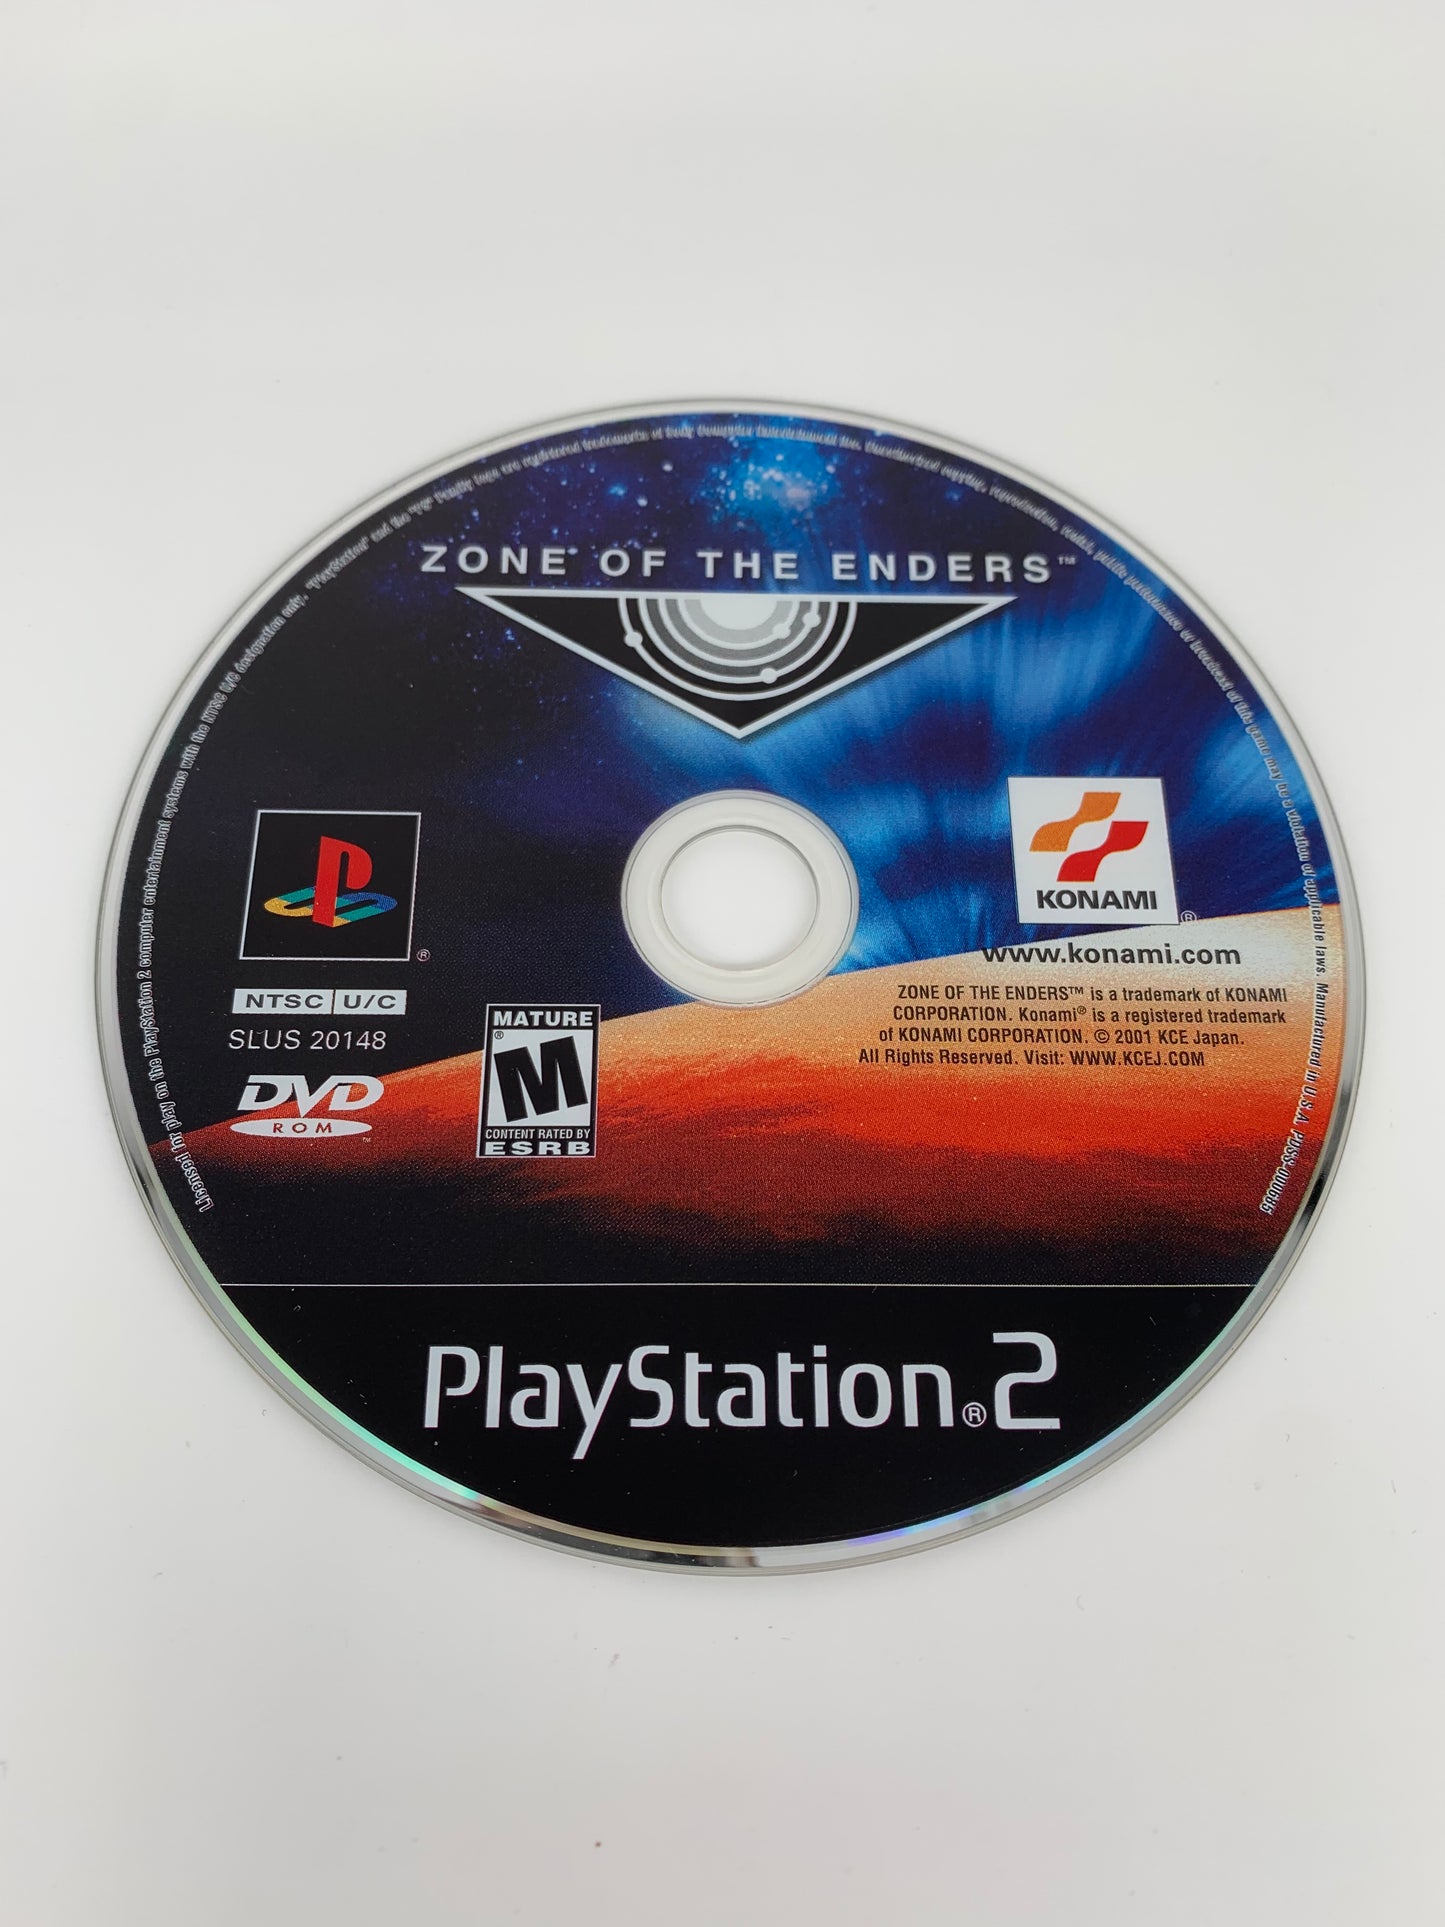 PiXEL-RETRO.COM : SONY PLAYSTATION 2 (PS2) COMPLET CIB BOX MANUAL GAME NTSC ZONE OF THE ENDERS